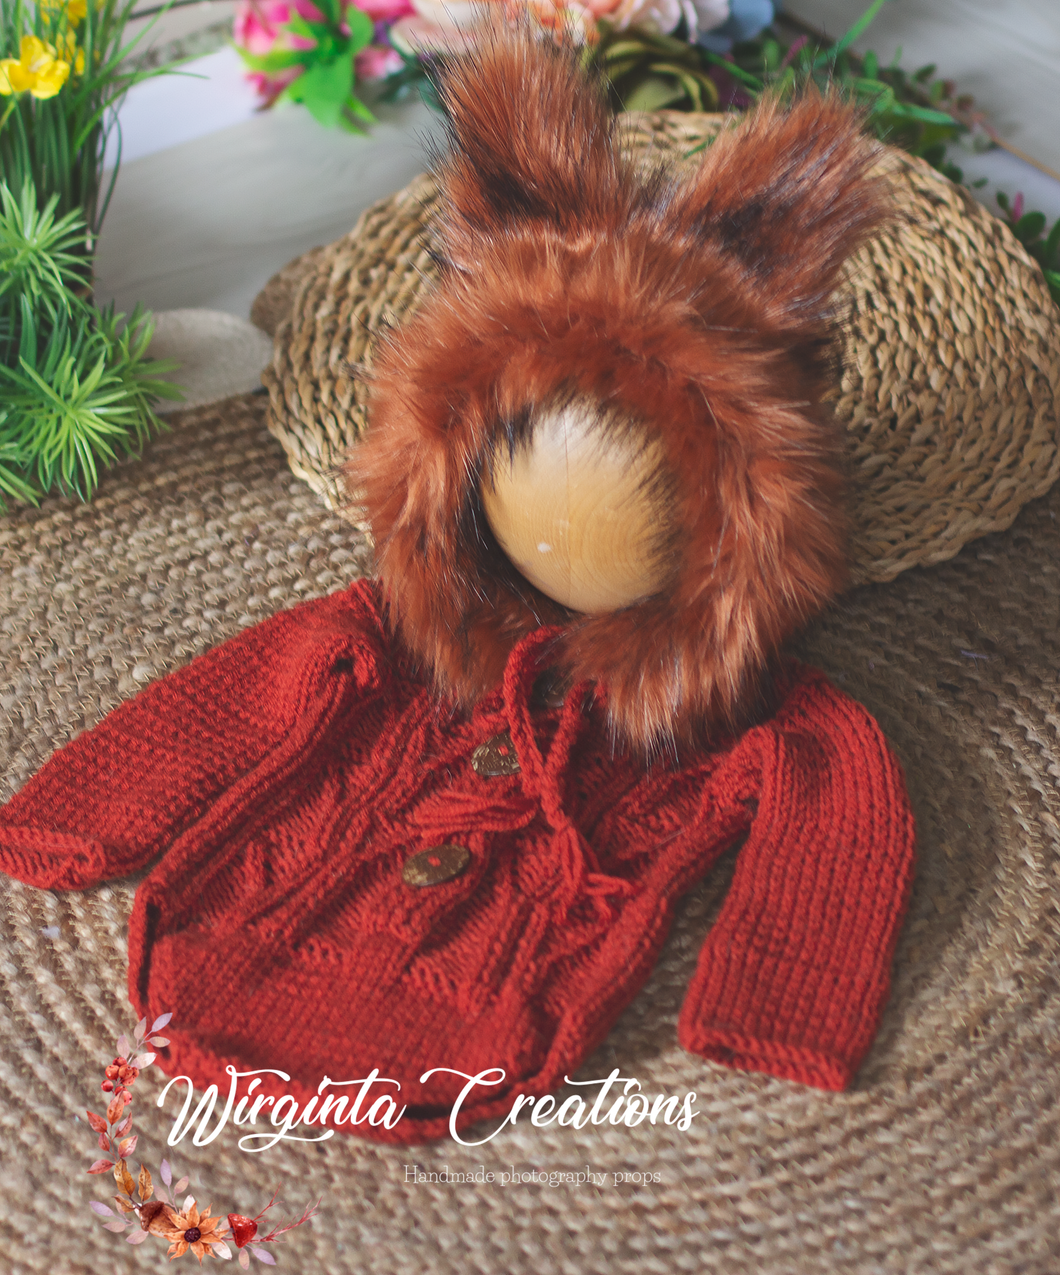 Burnt orange fox outfit for 6-12 months old. Ready to send